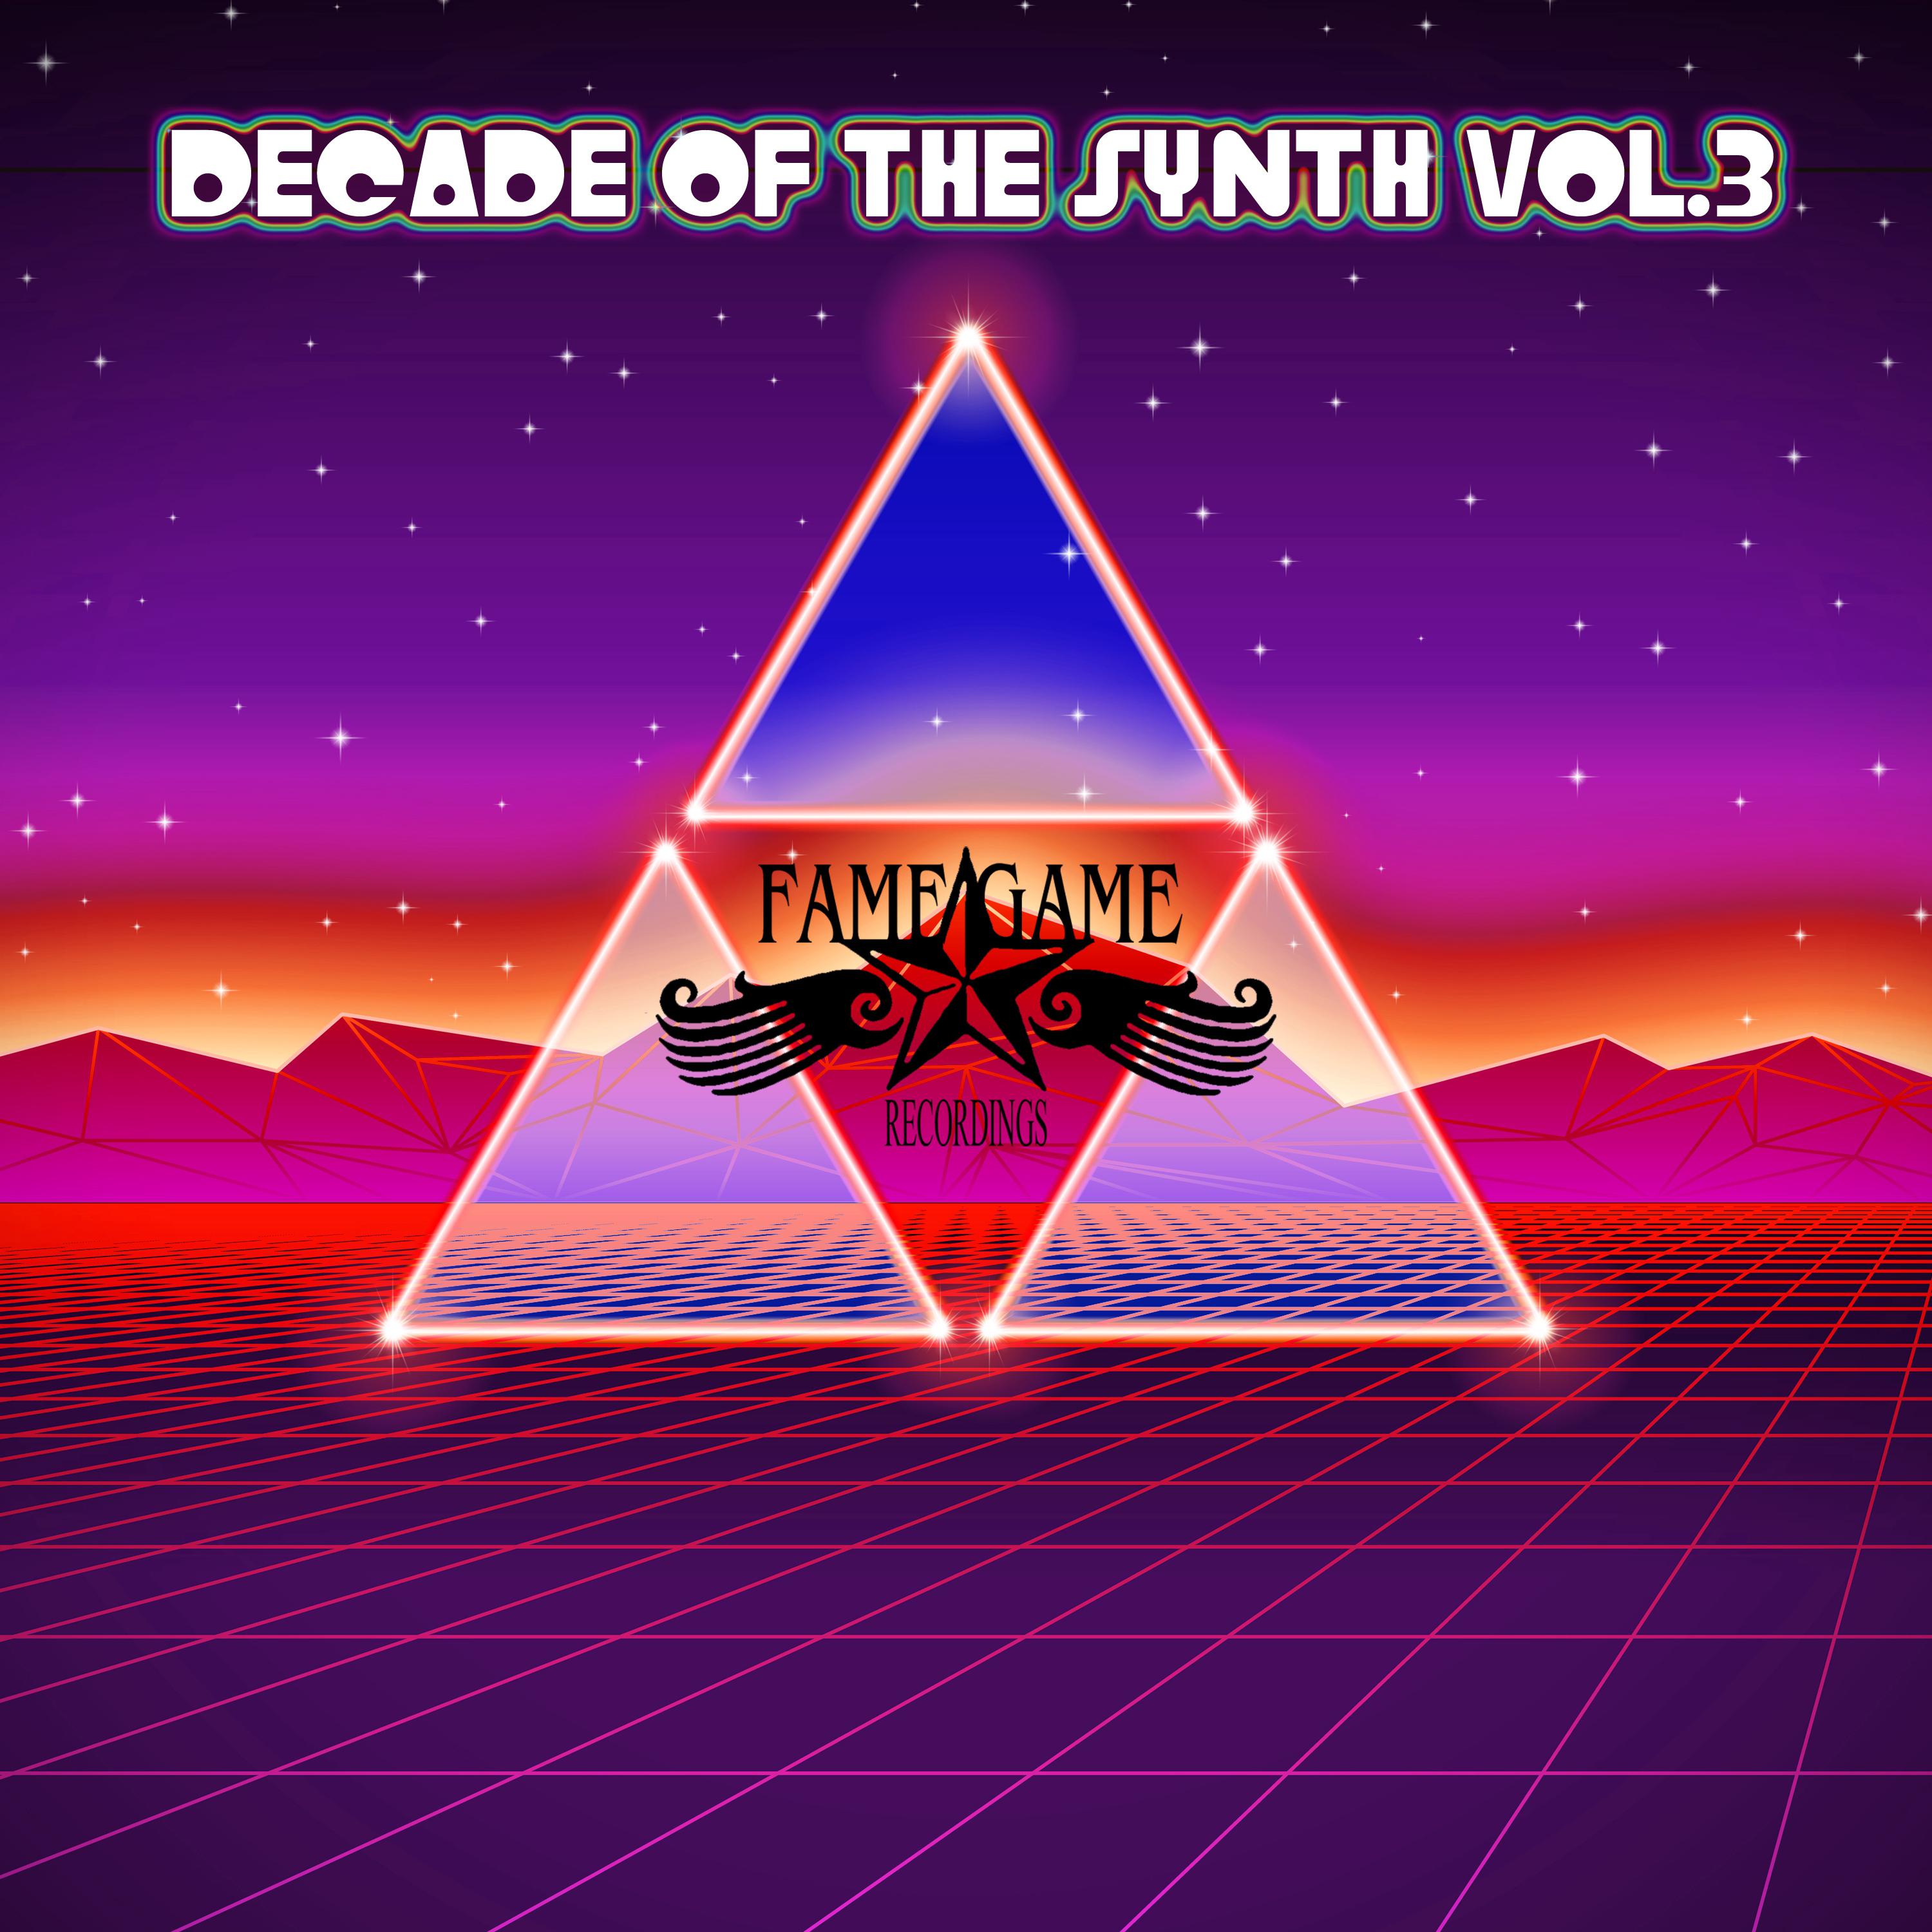 Decade of the Synth, Vol. 3